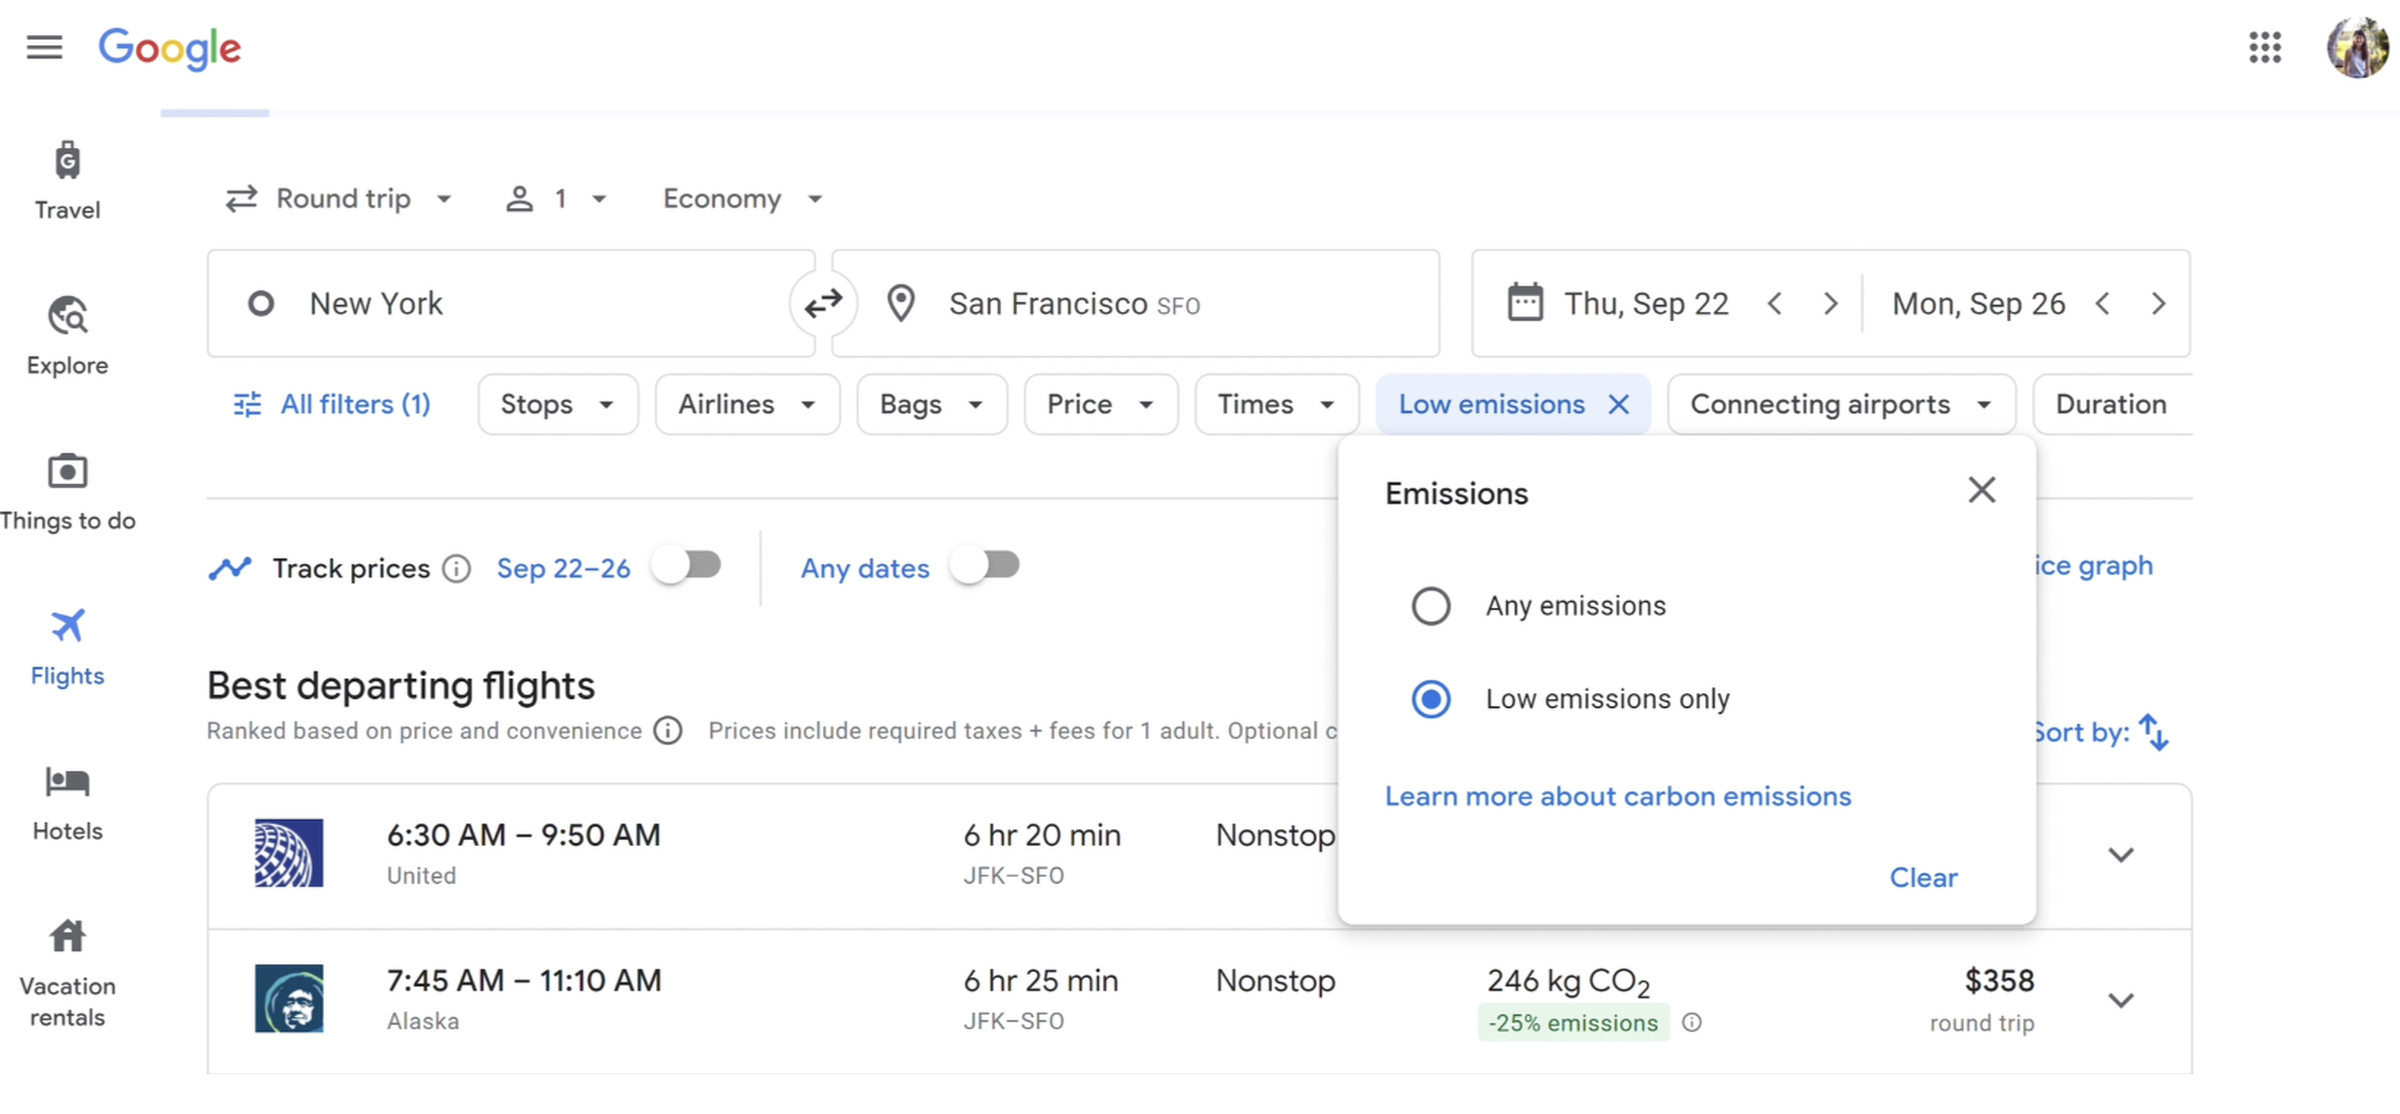 Search results in Google Flights with the option to view the results in order of low emissions